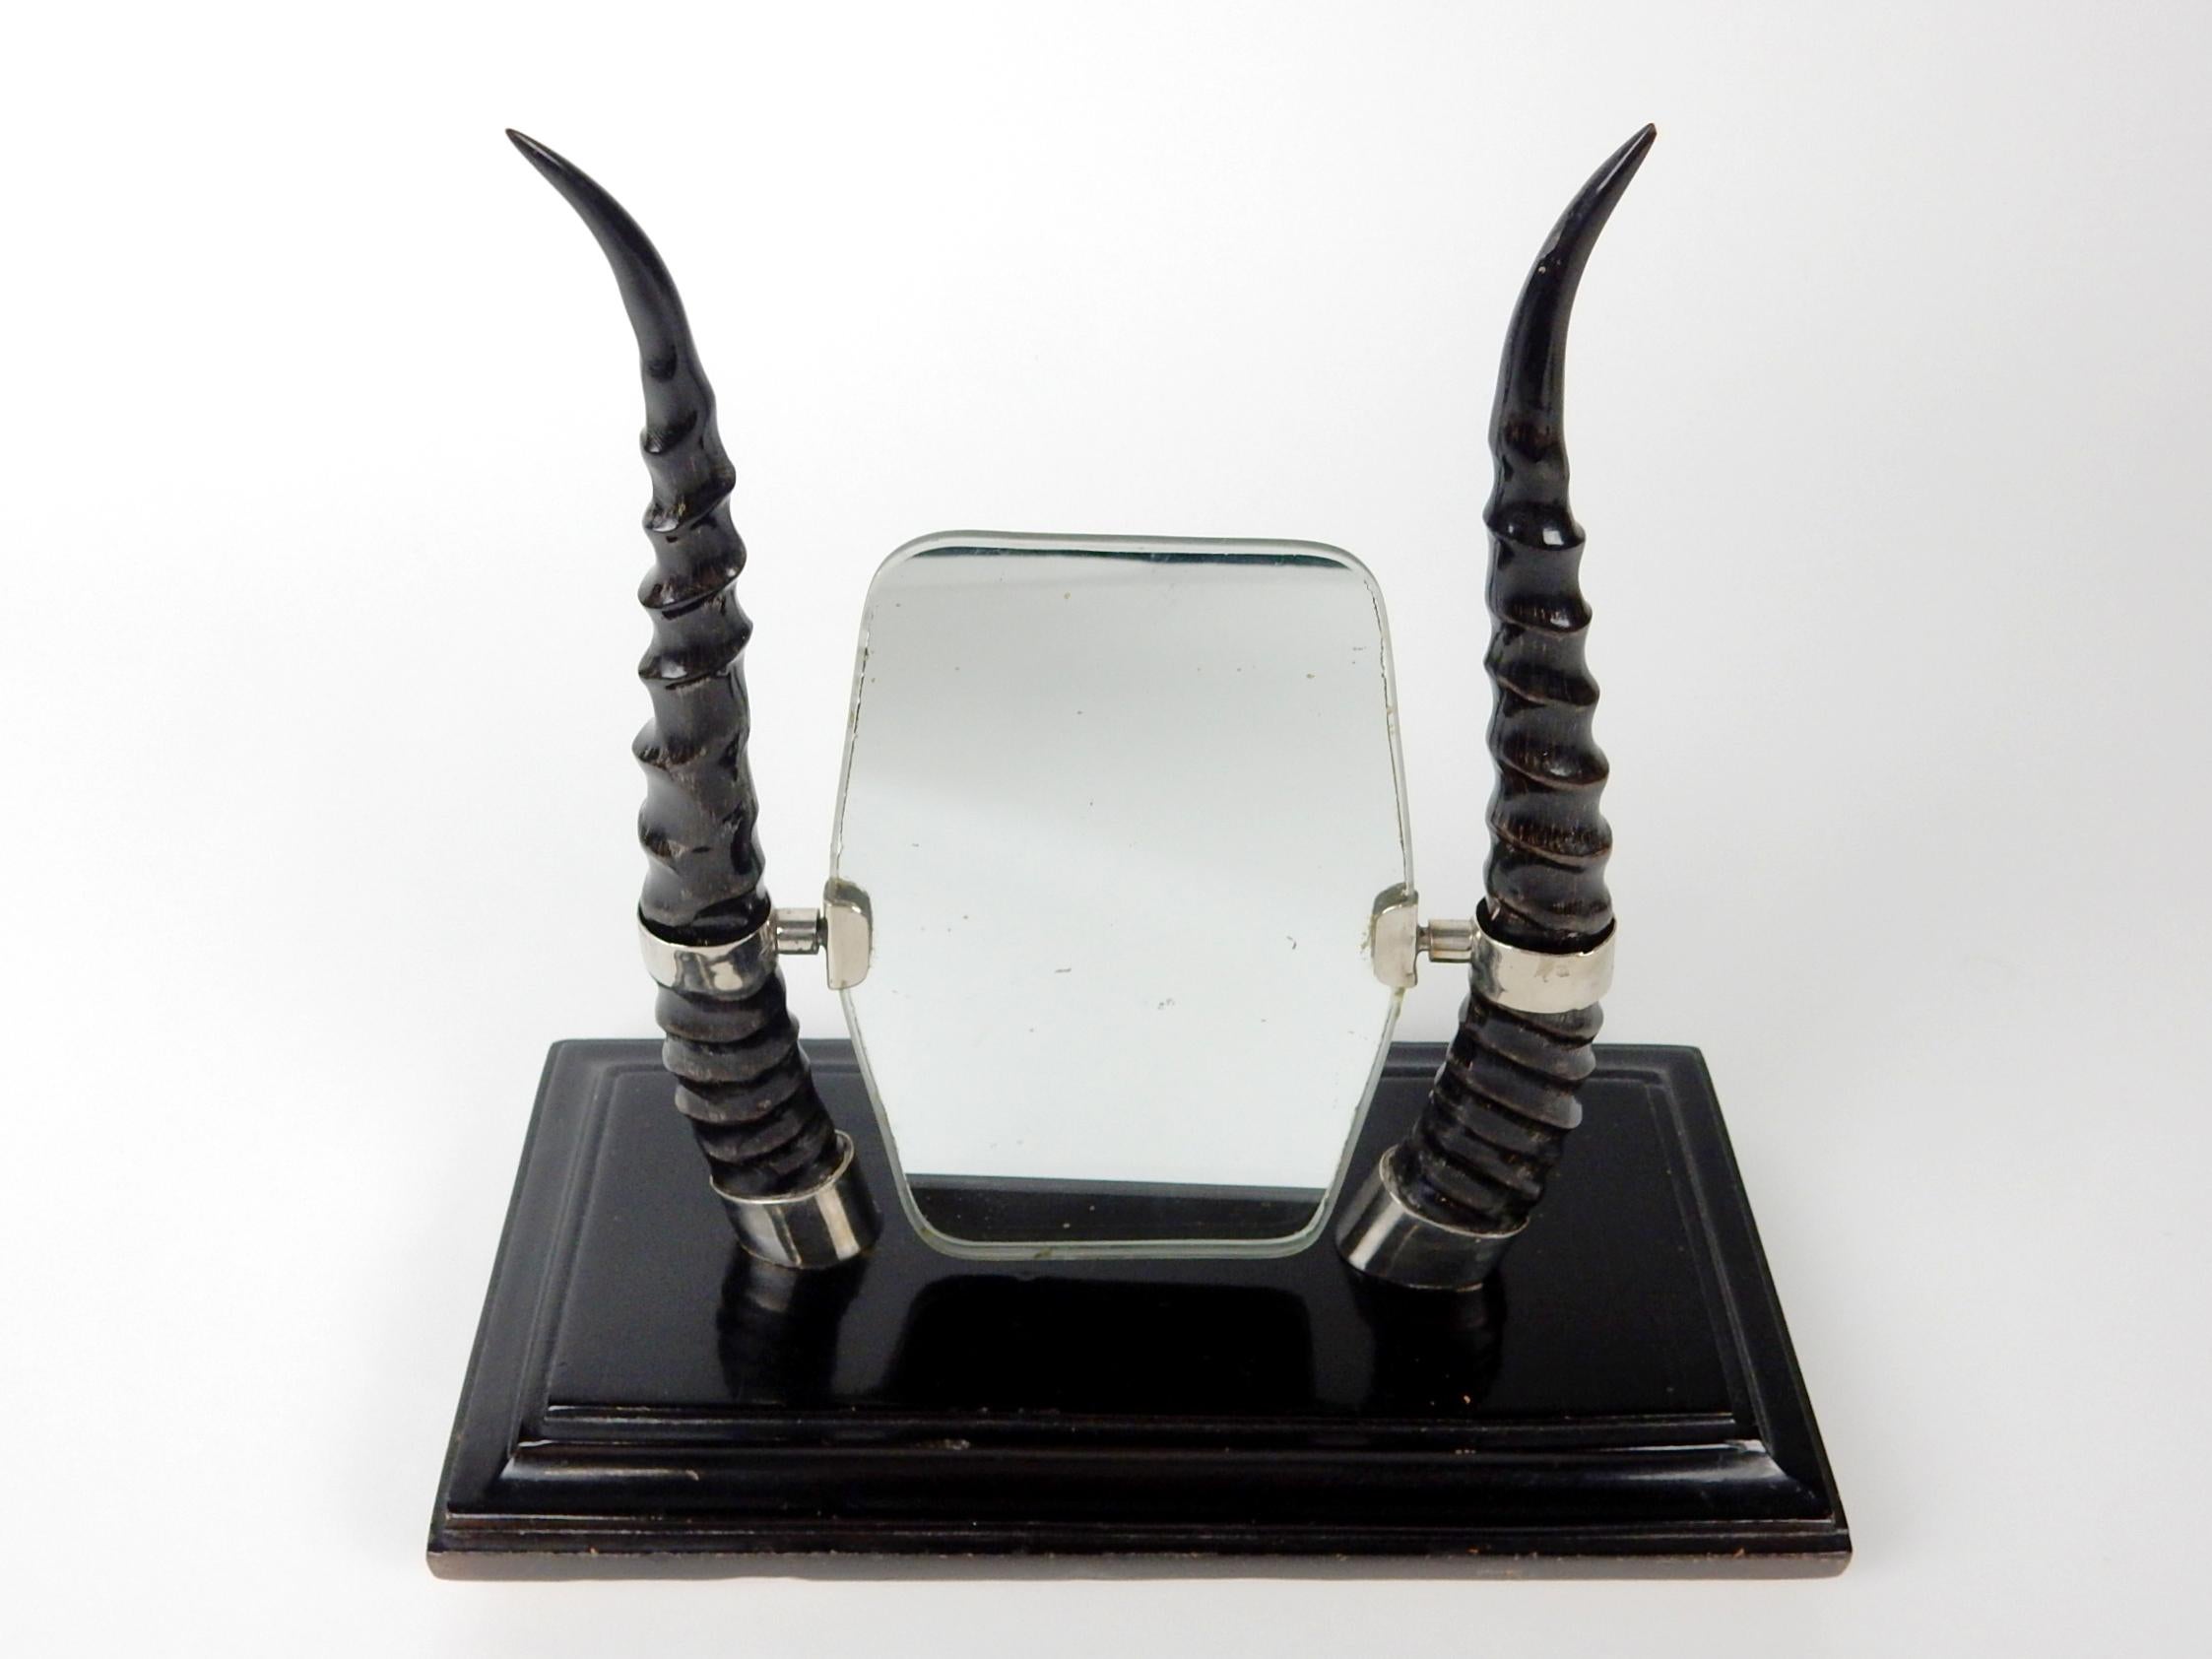 Exotic Art Deco era African antelope horn and hammered coin silver table mirror.
Charming small scale decorative piece circa 1940's. Measure: Stands just 12-1/2